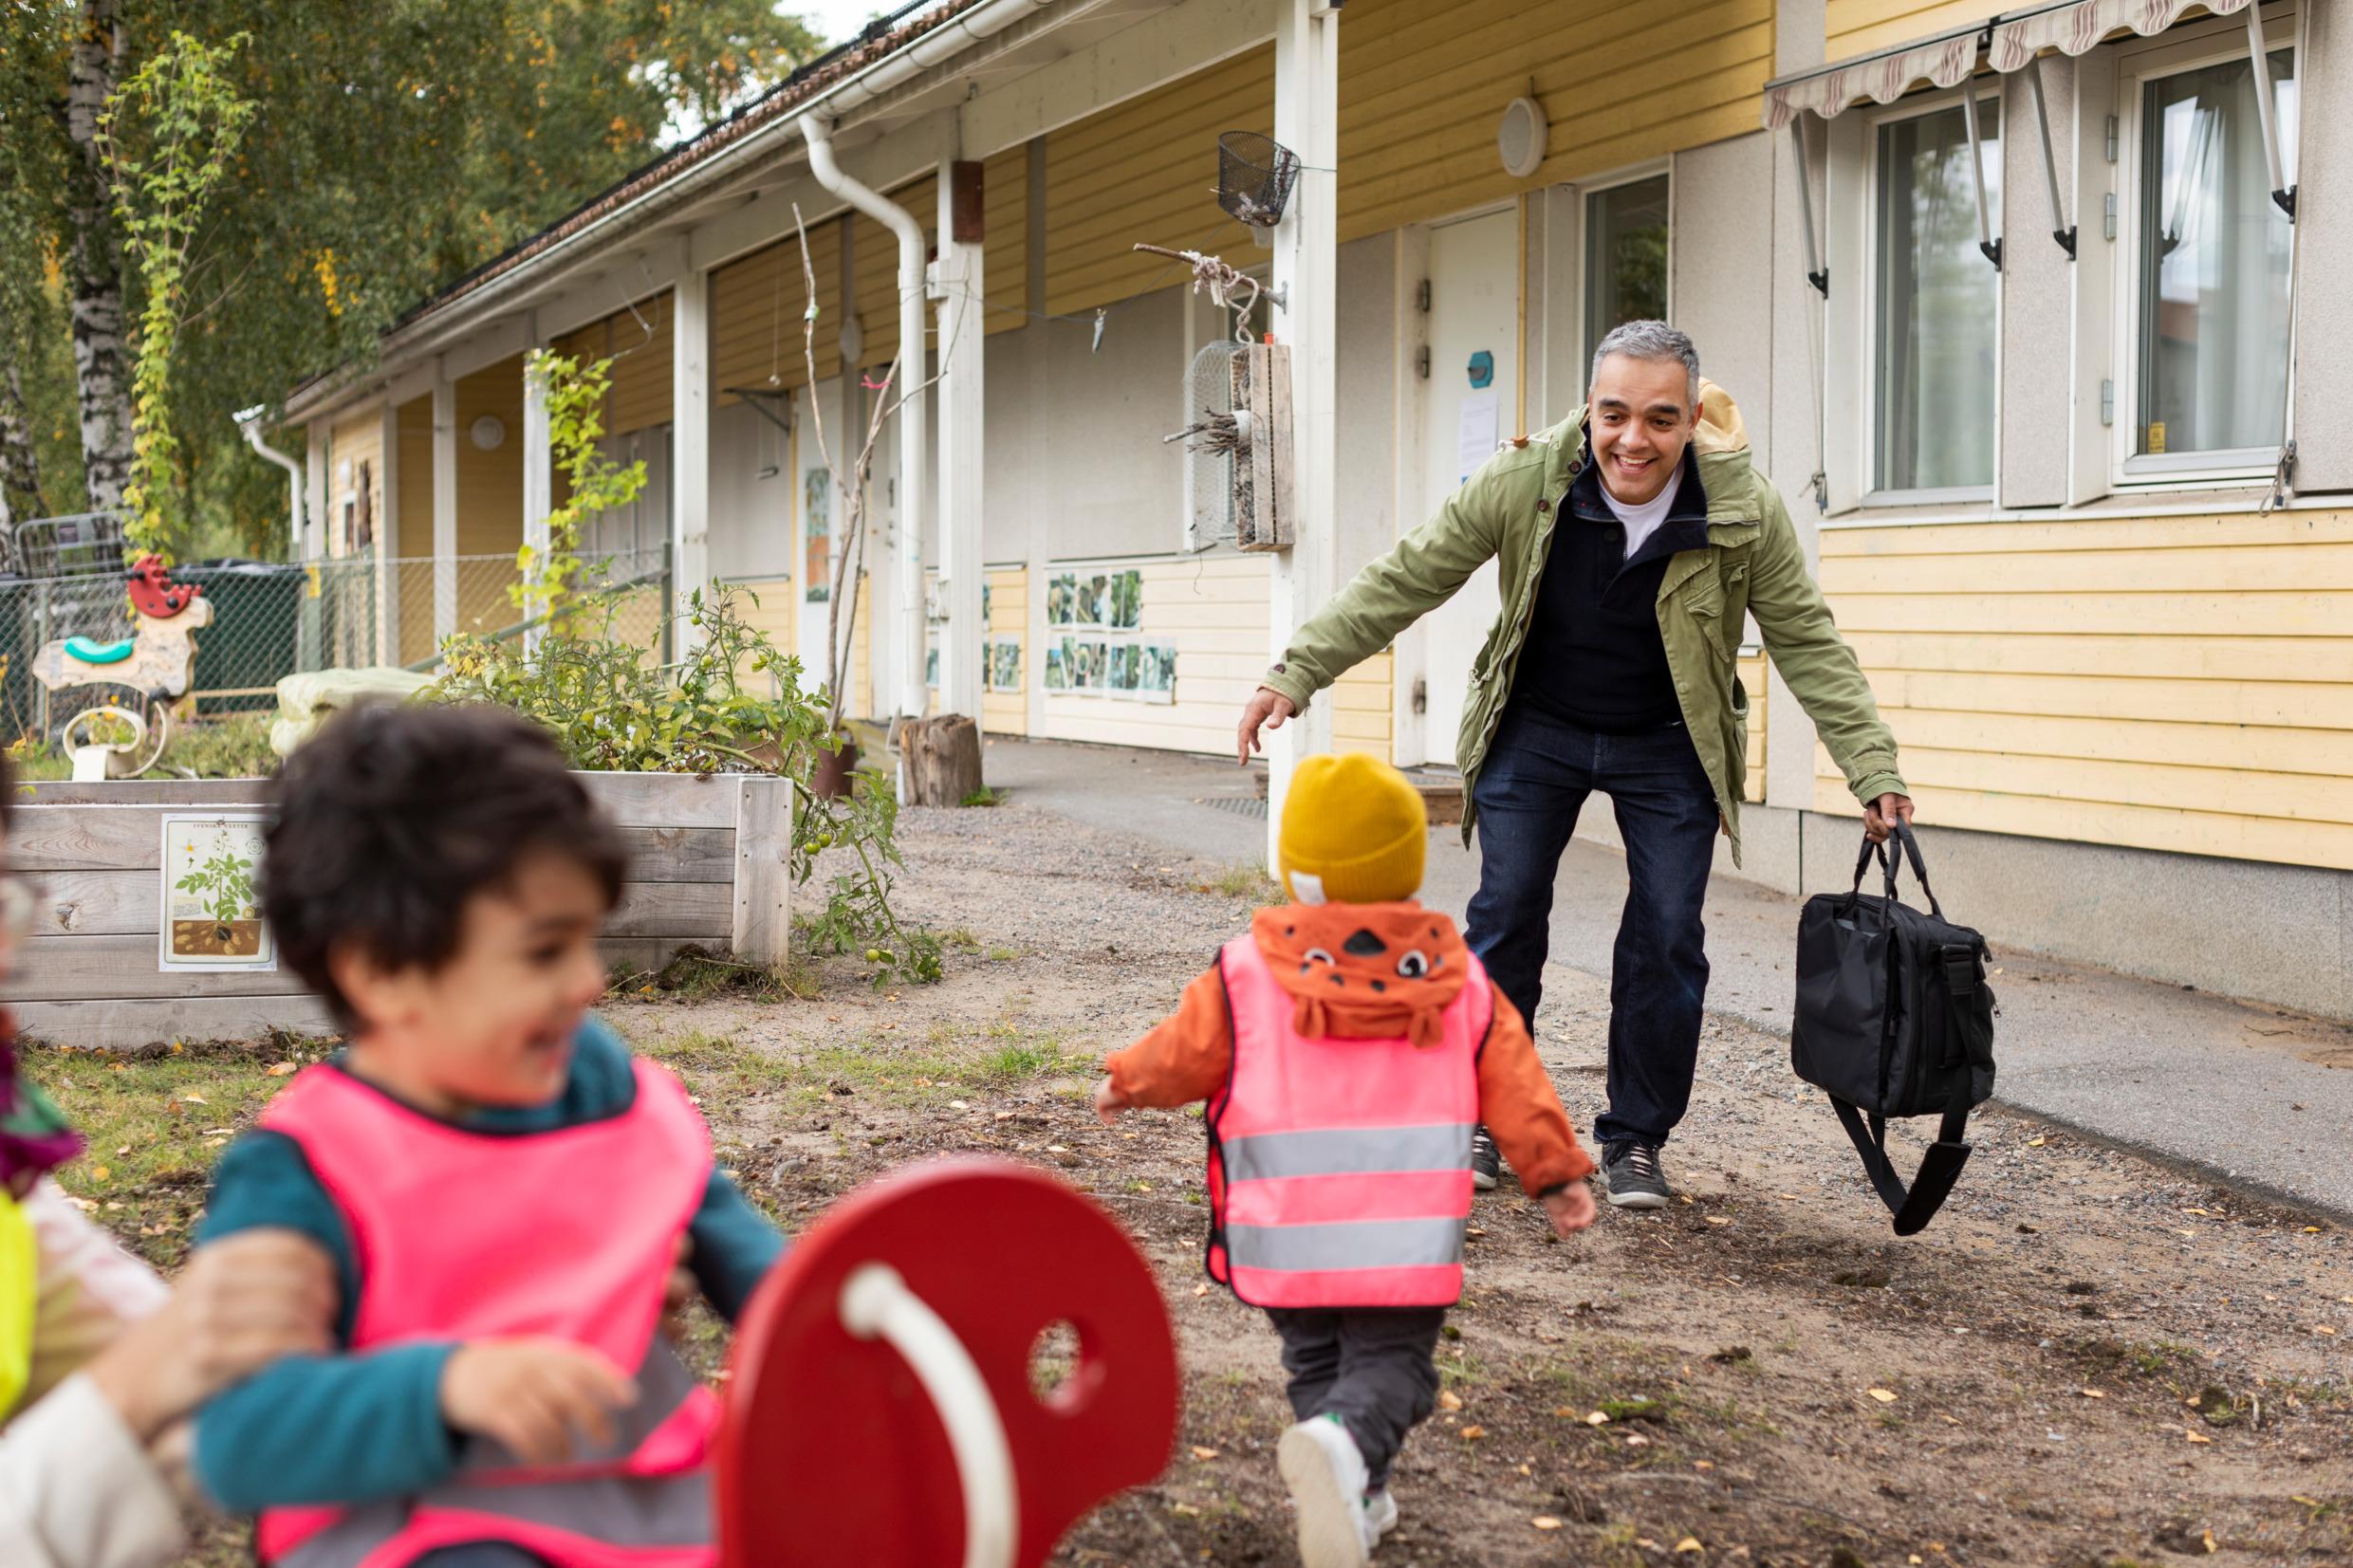 A father picks up his child from nursery school. Daycare helps with the work–life balance.